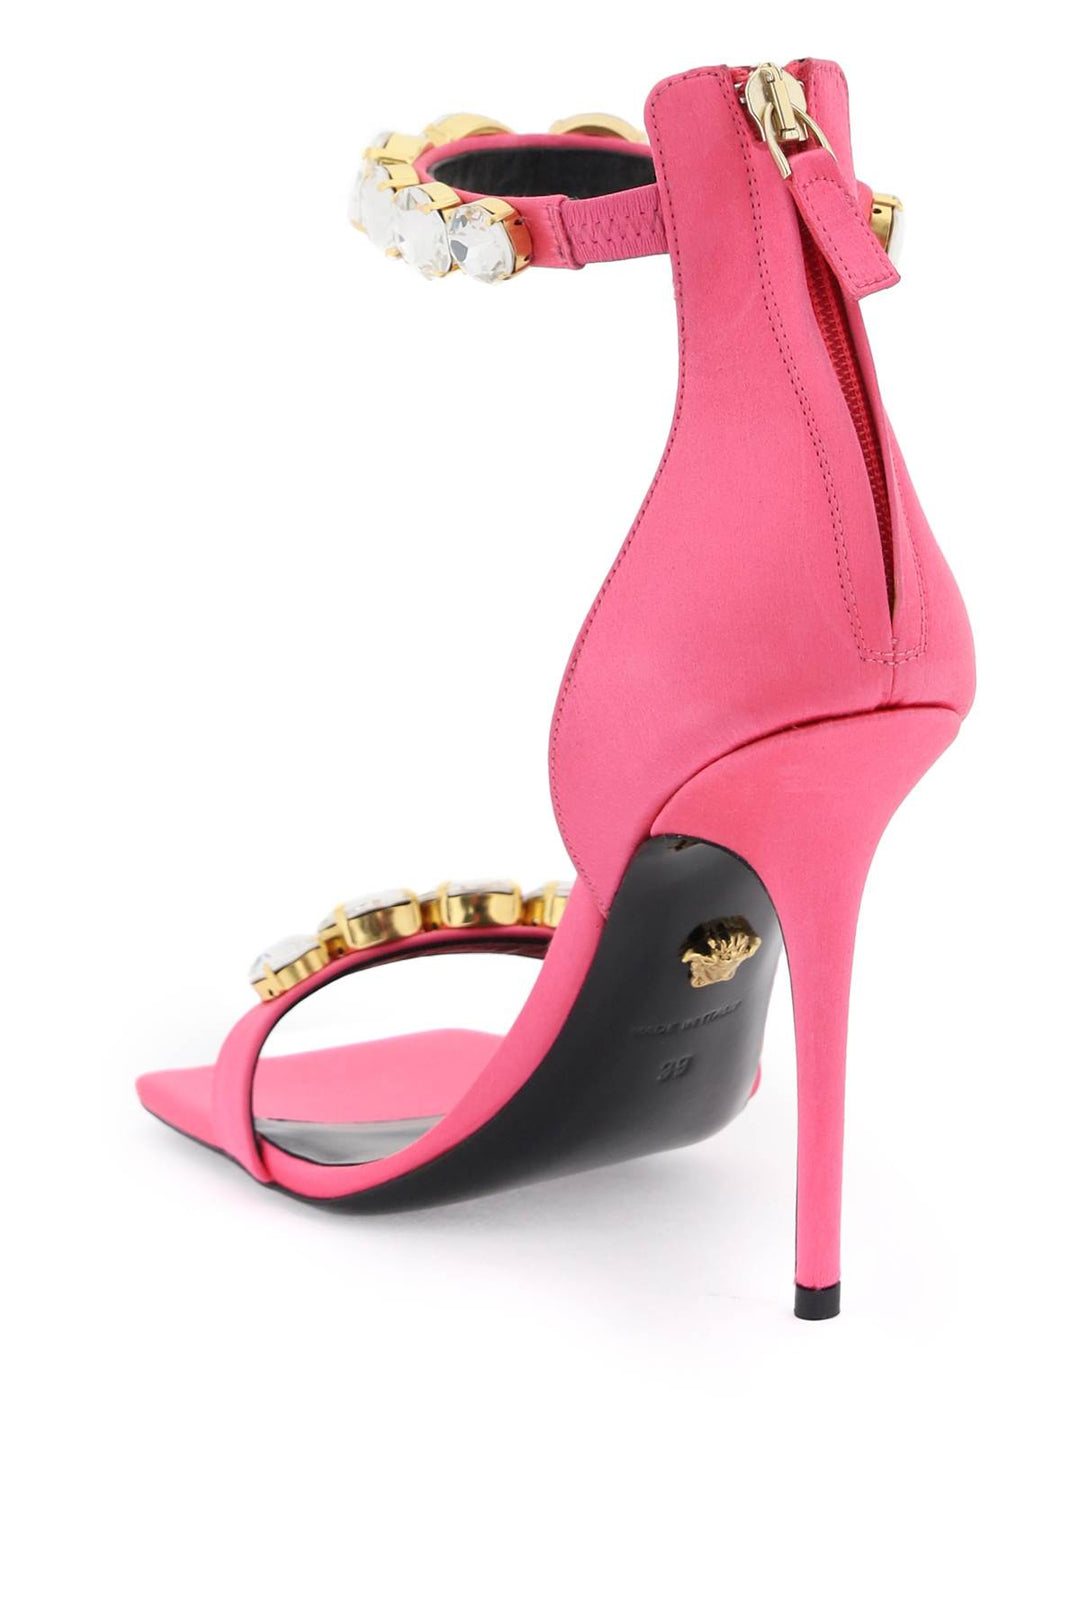 Versace Satin Sandals With Crystals   Rosa